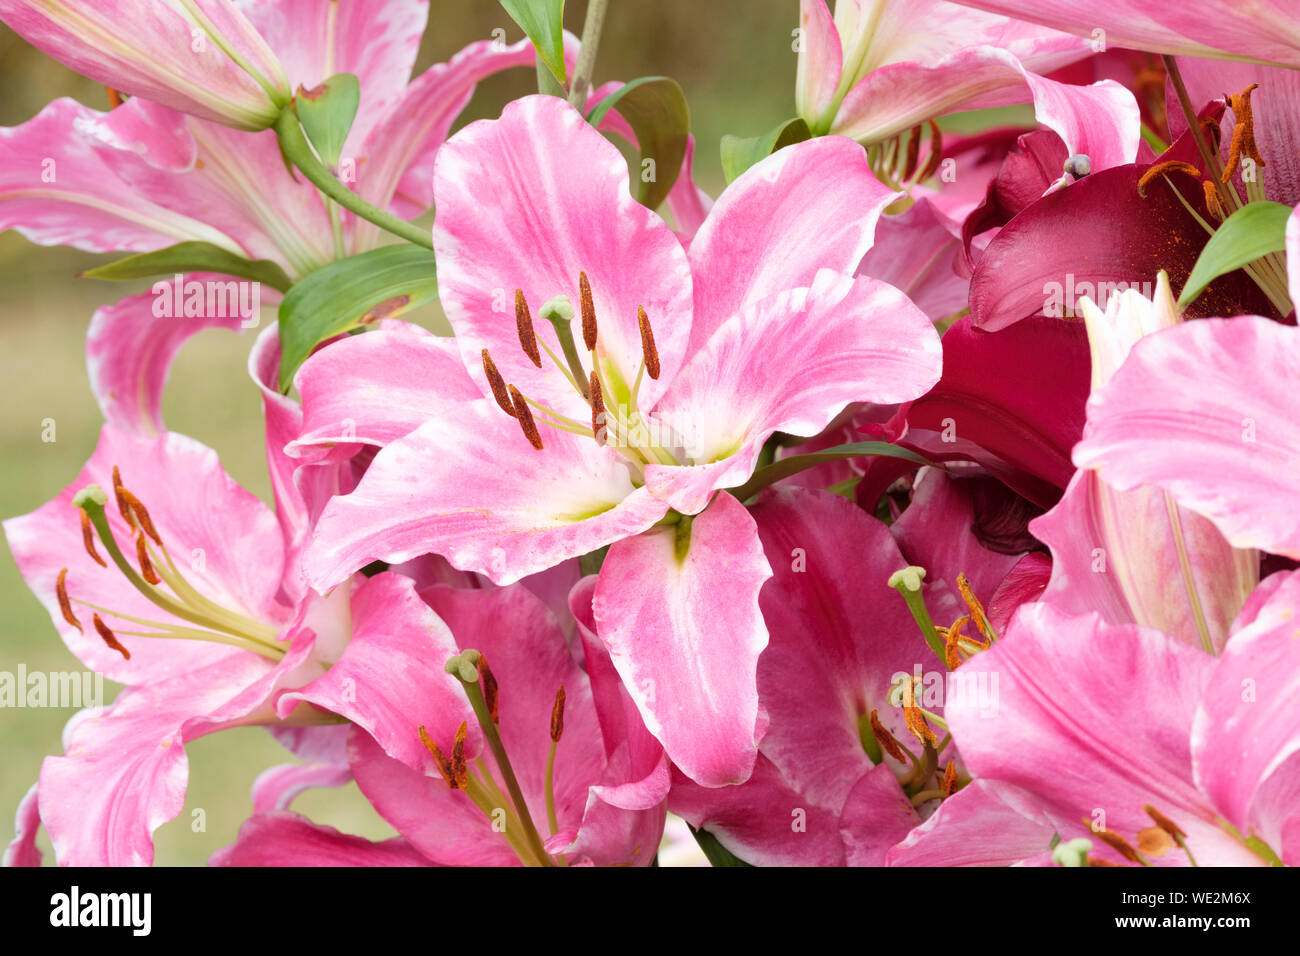 Close-up of pink/white flowers of lily Provence, Lilium provence Stock Photo